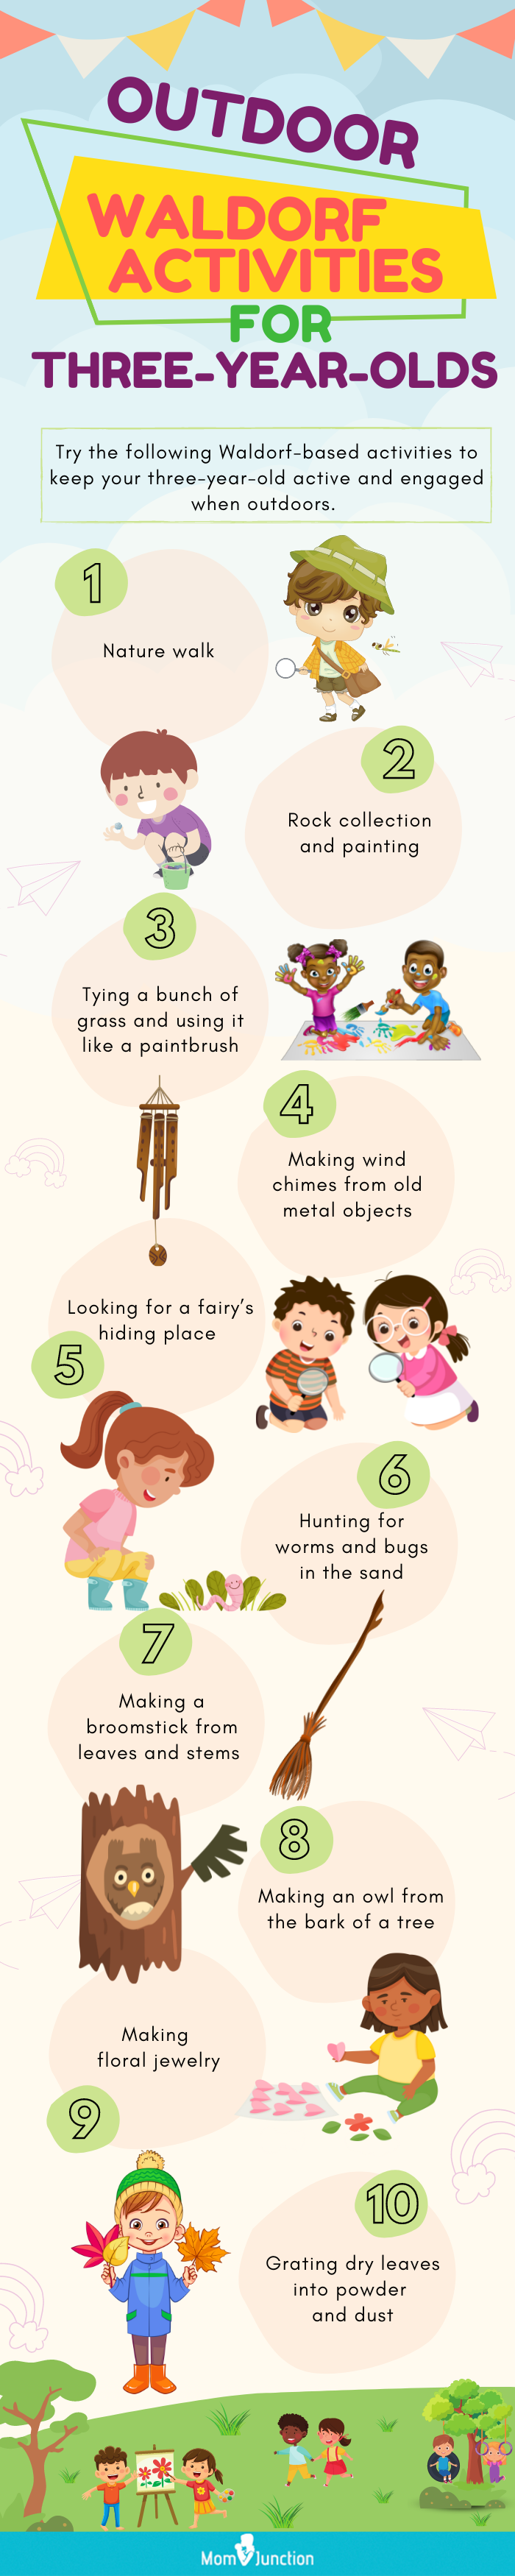 outdoor waldorf activities for three year olds (infographic)